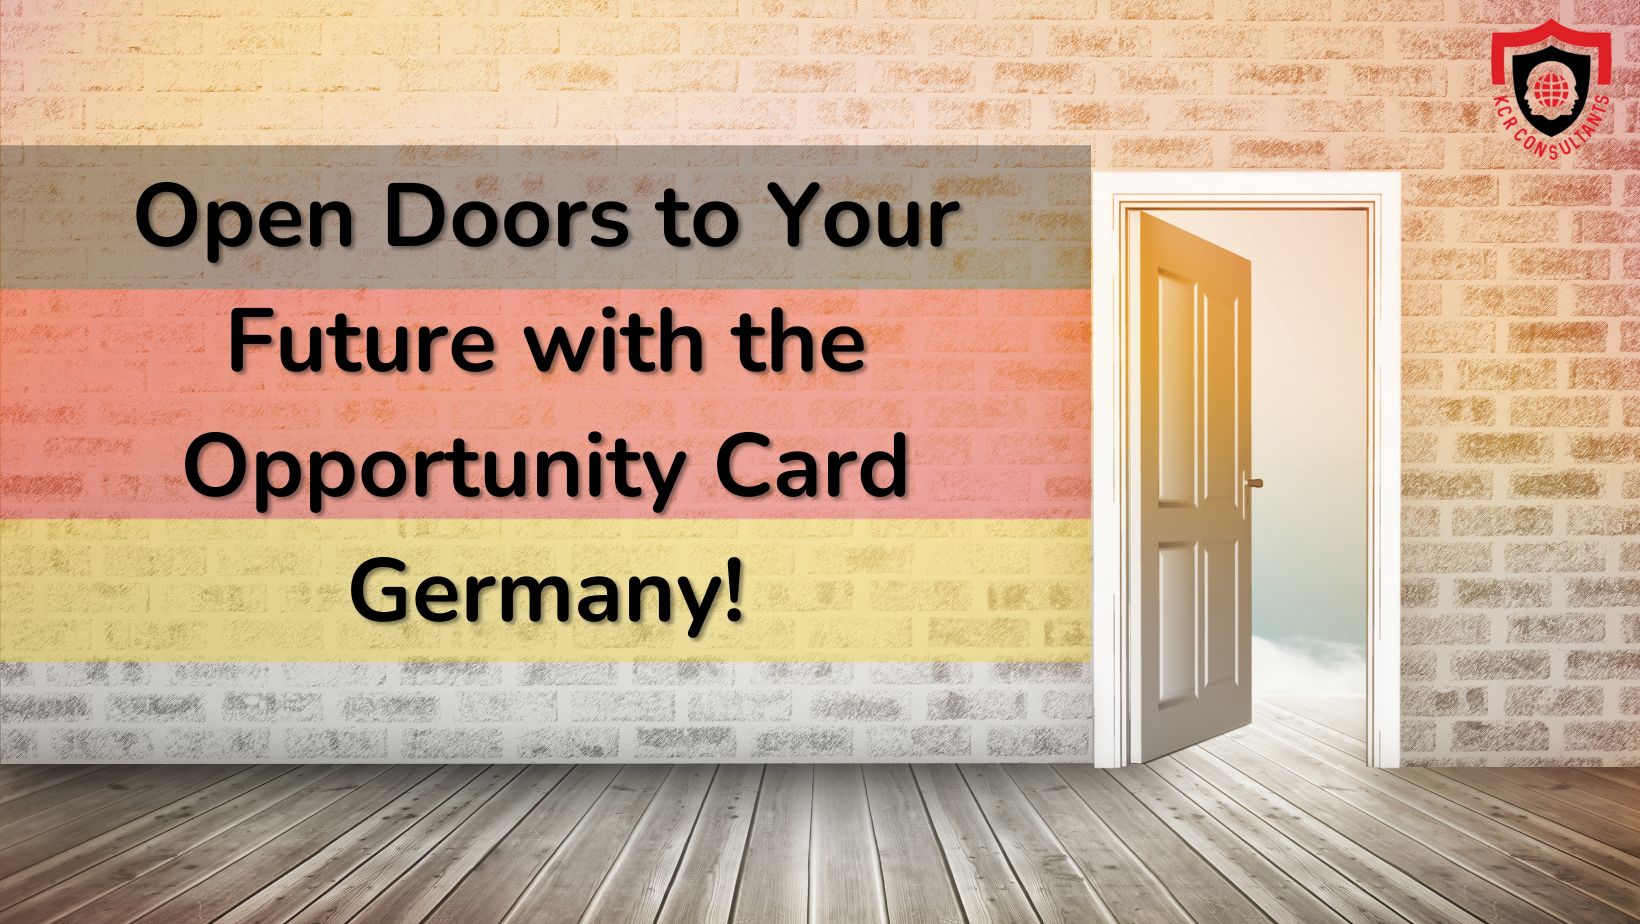 Opportunity Card Germany - kcr consultants - opportunities in Germany